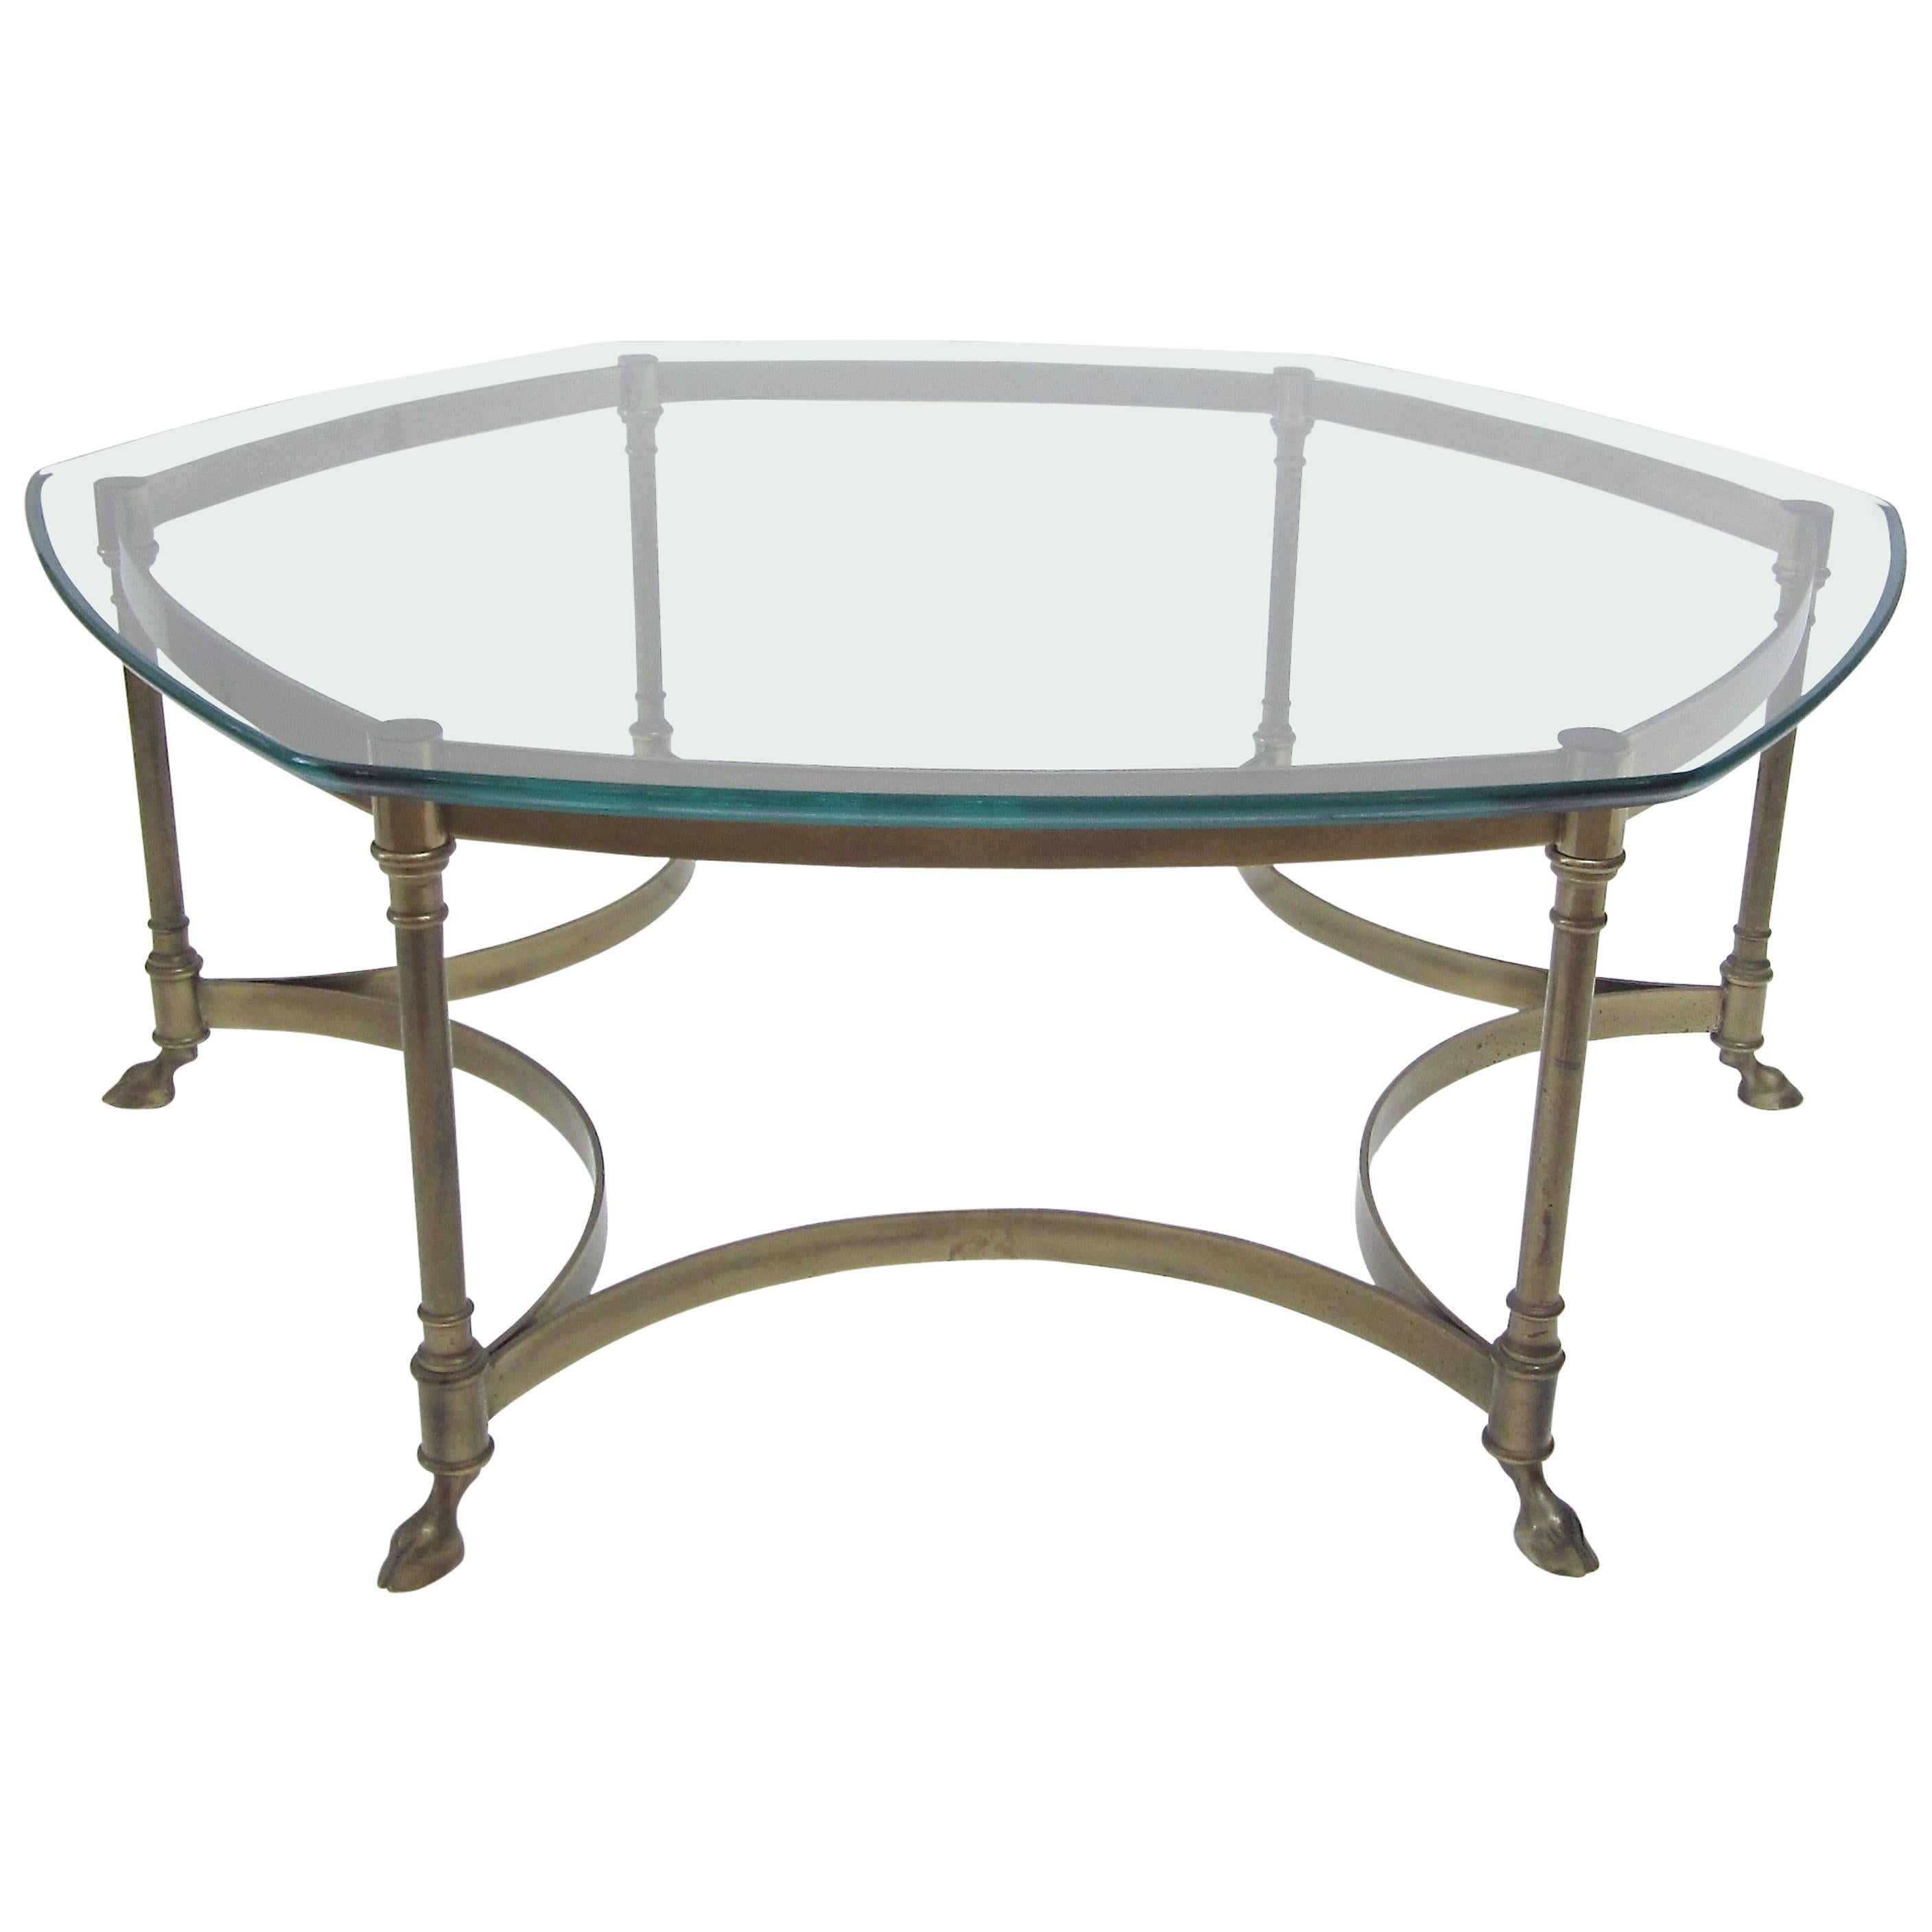 Brass Mastercraft Cocktail Table, Hexagonal with Glass Top For Sale